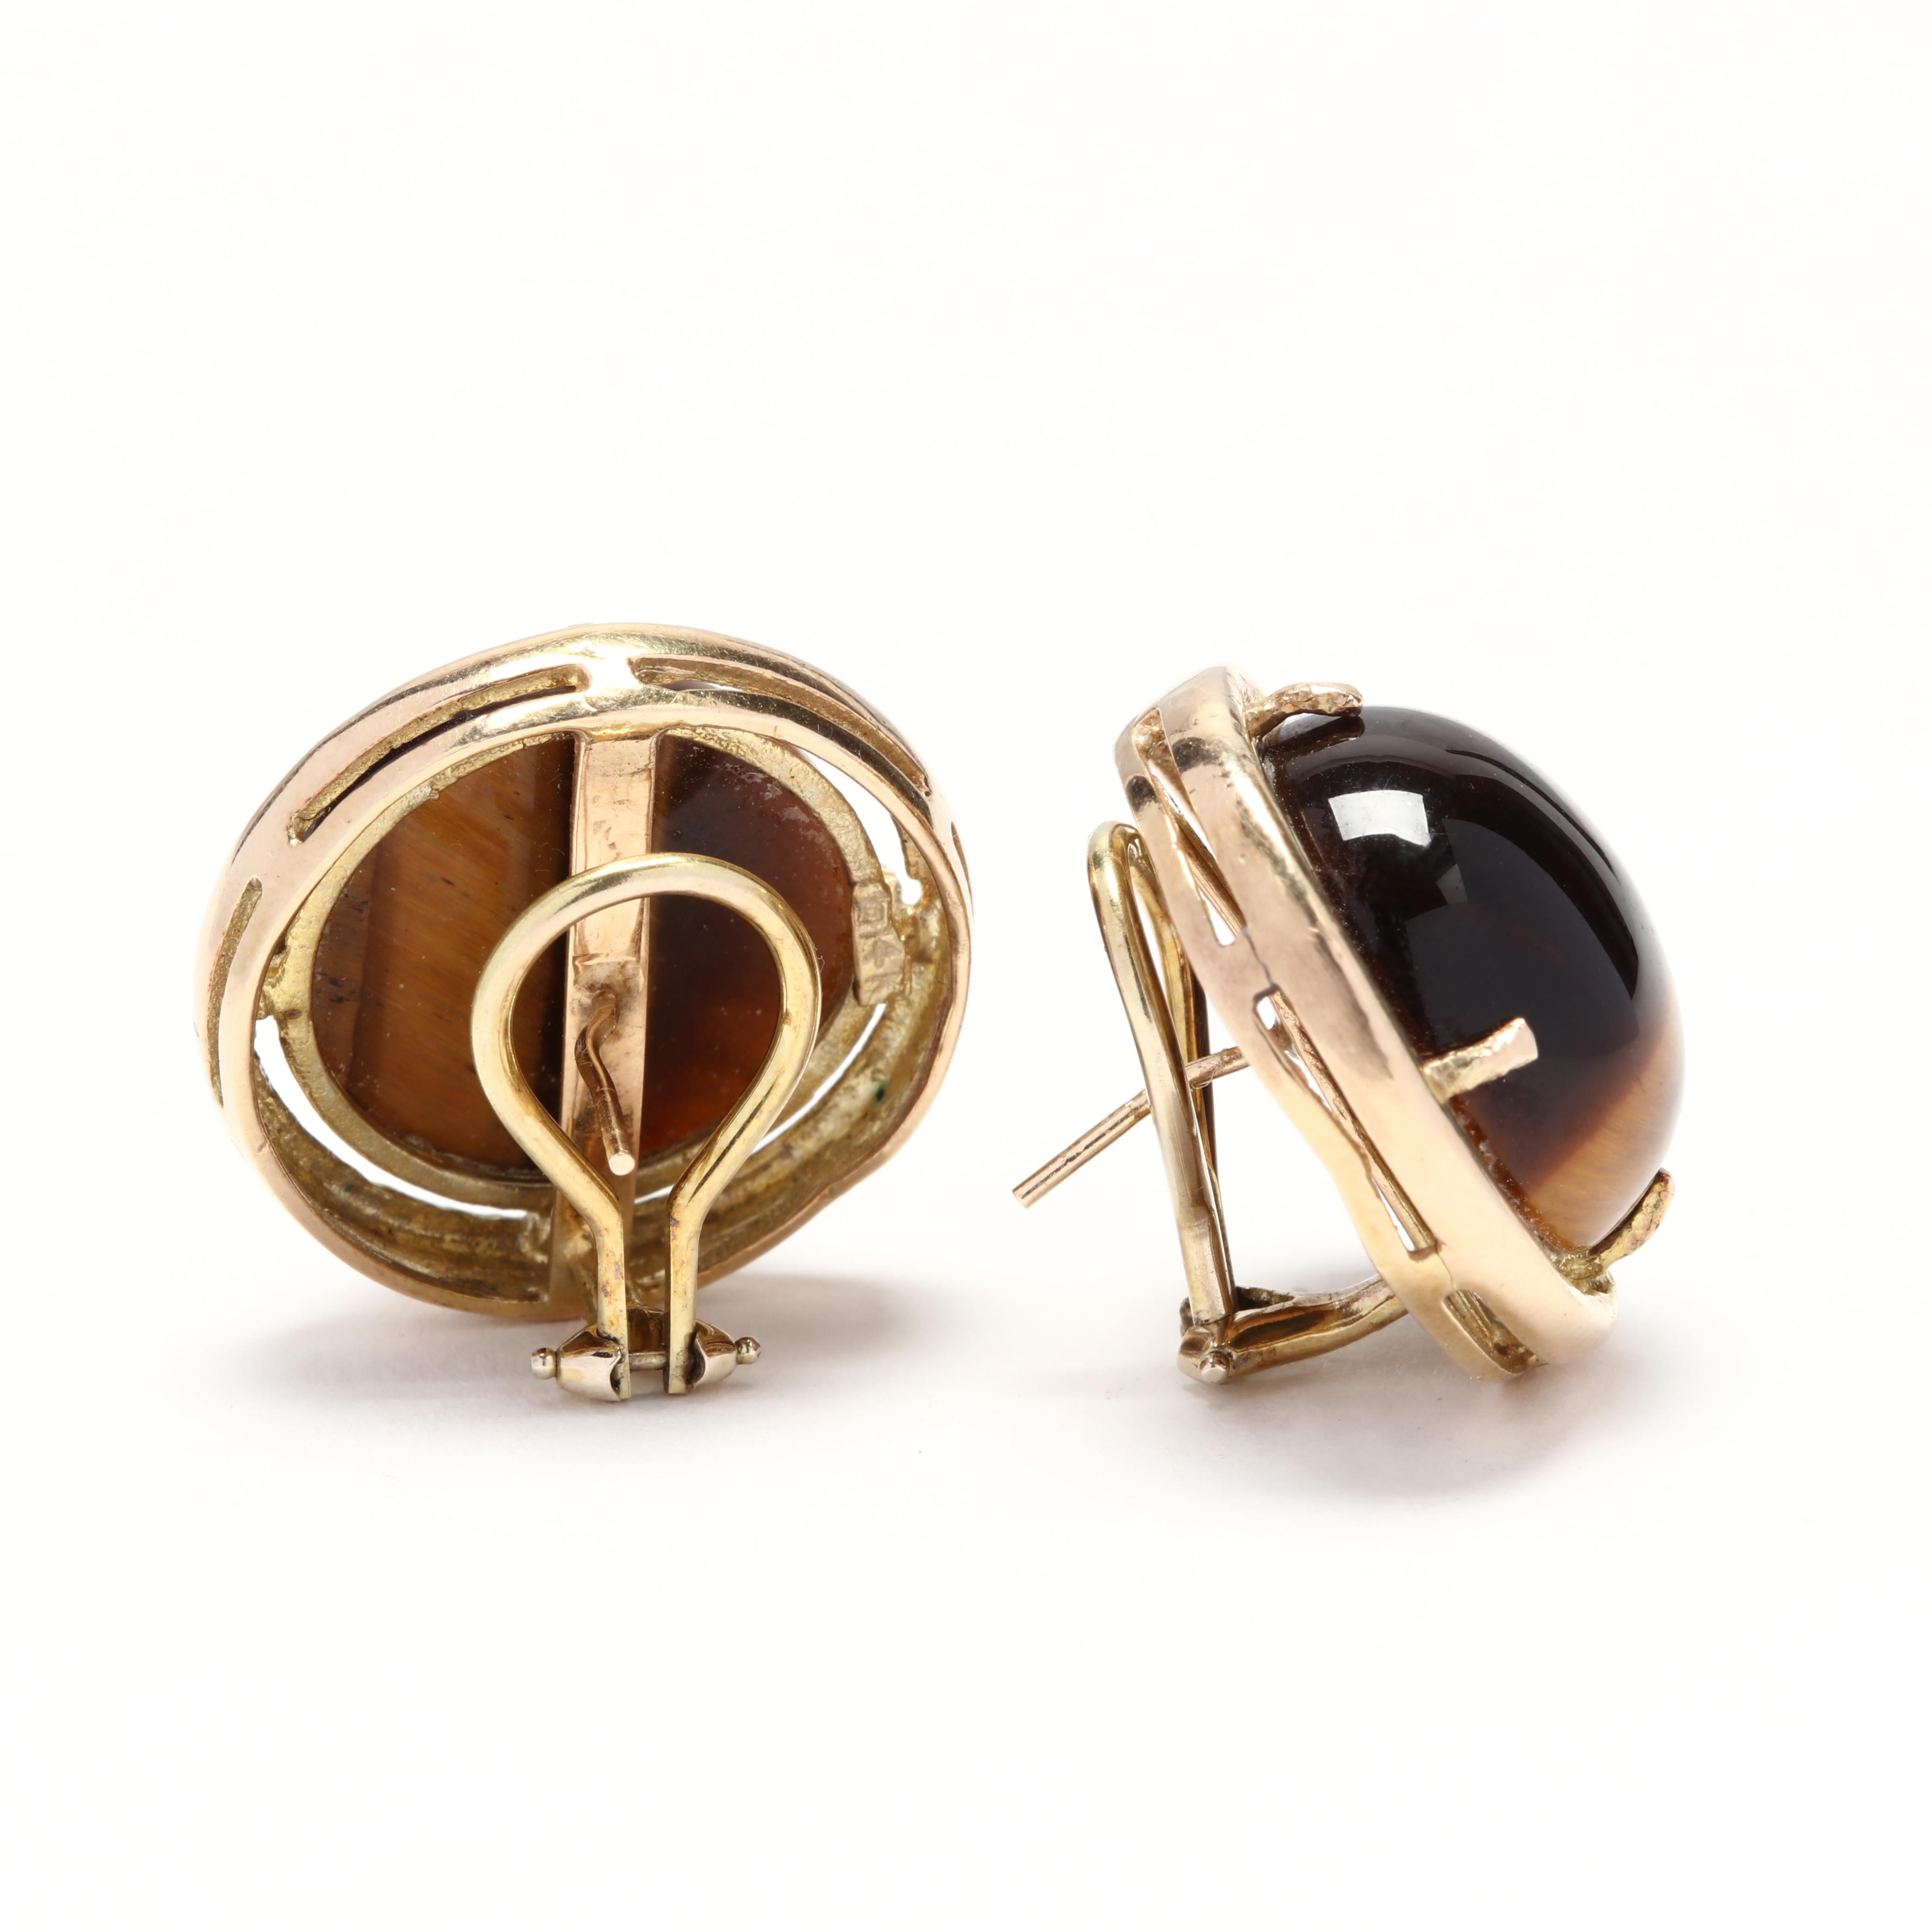 A pair of vintage prong set, round cabochon tiger's eye earrings with a gold border and pierced omega backs.

Stones:
- tiger's eye, 2 stones
- round cabochon
- 18 x 18 x 7.25 mm

Length 23.5 mm

10.91 dwts.

* Please note that this is a vintage